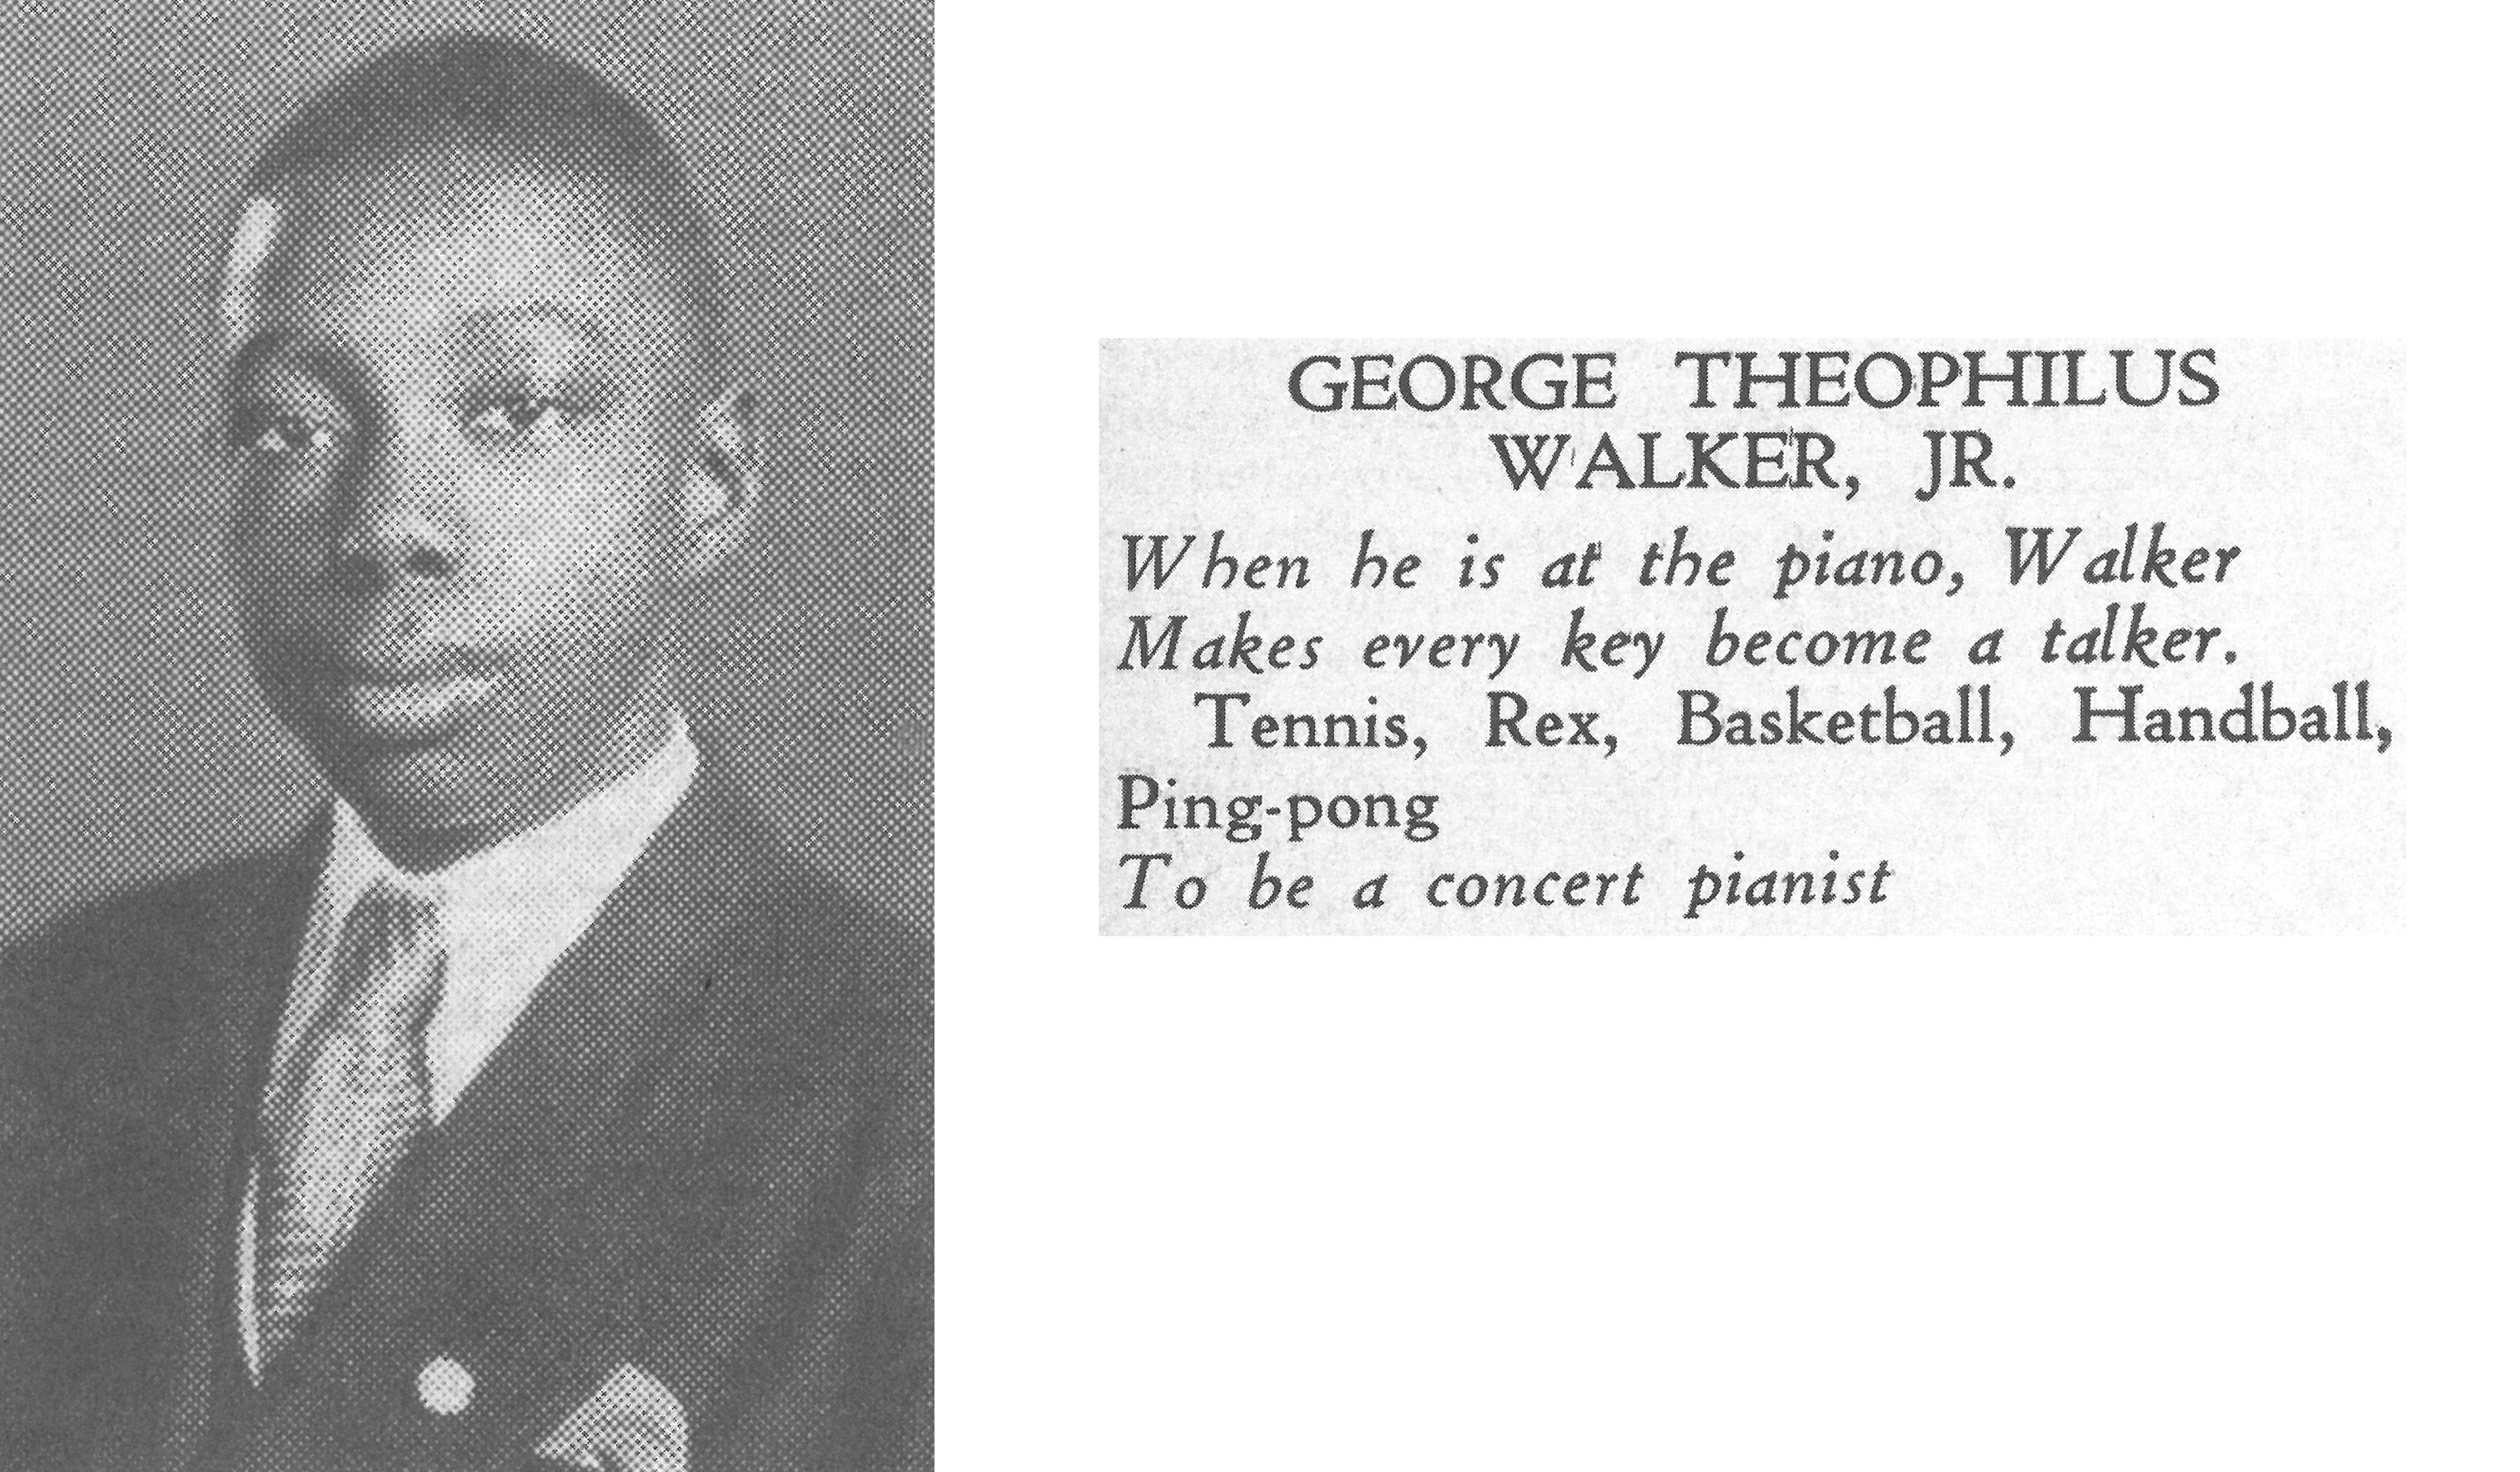 George Walker's photo and a quote about him that appeared in the 1937 Yearbook of Dunbar High School in Washington. D.C.